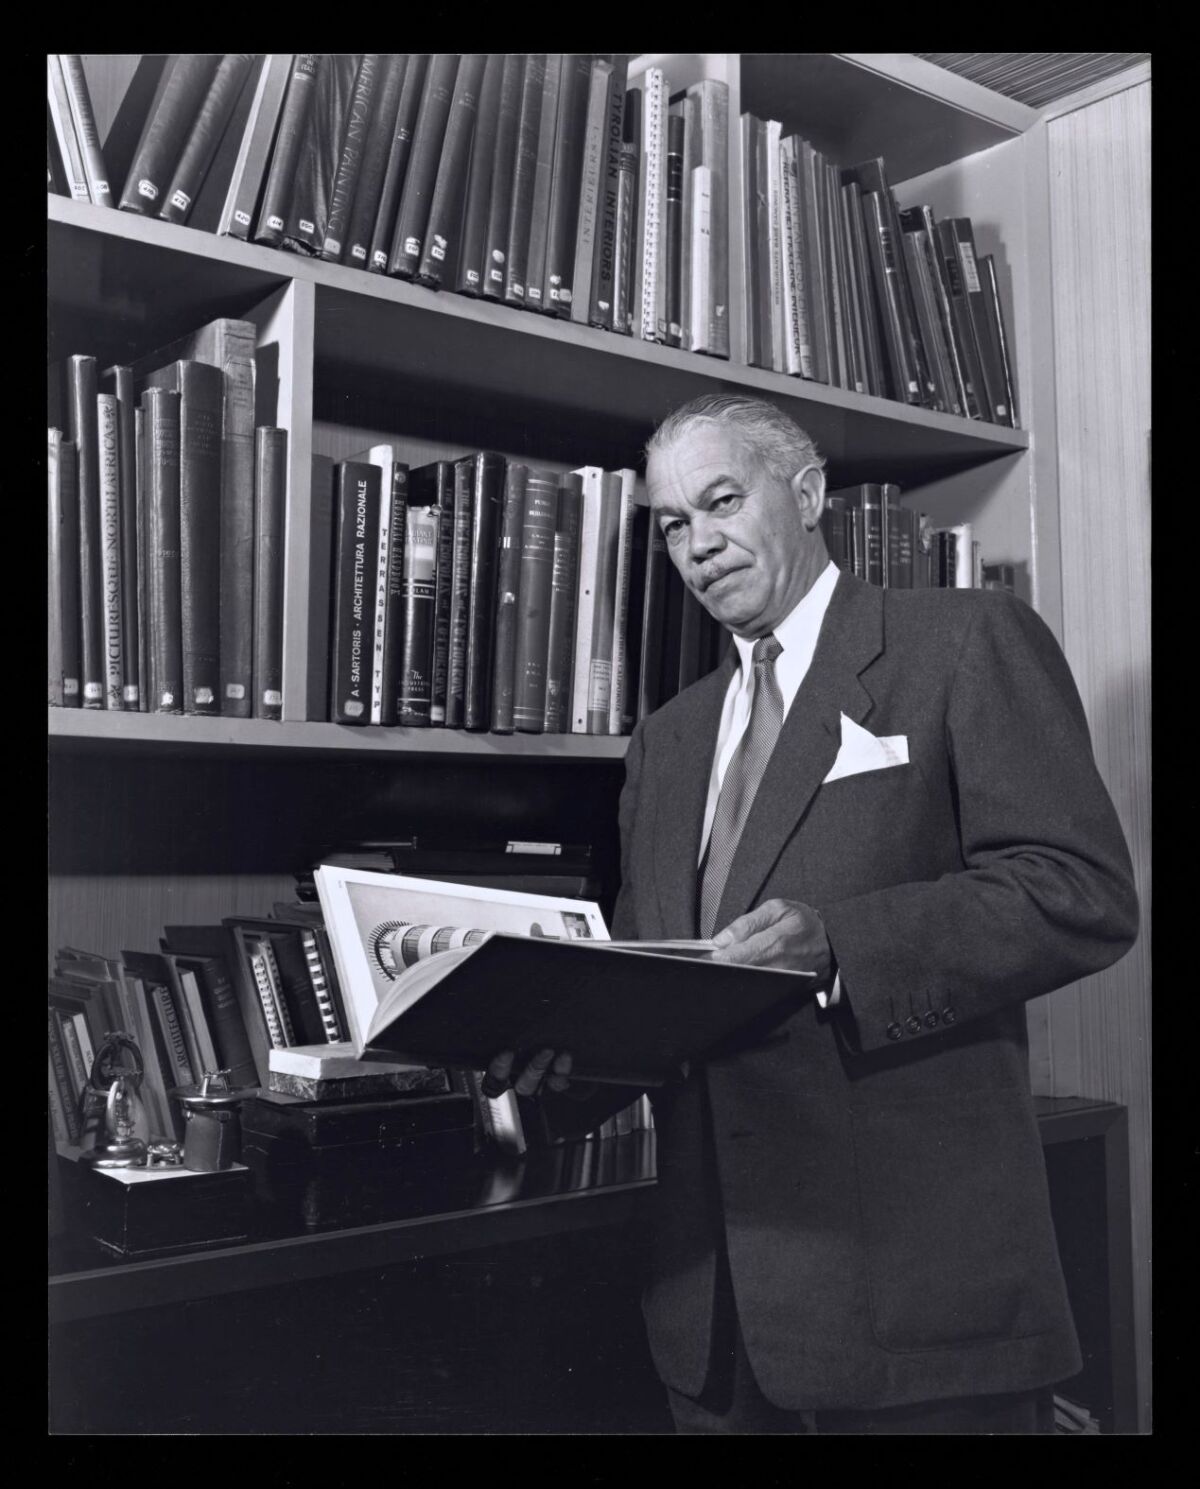 A black-and-white portrait shows architect Paul Williams standing in a library holding a book.